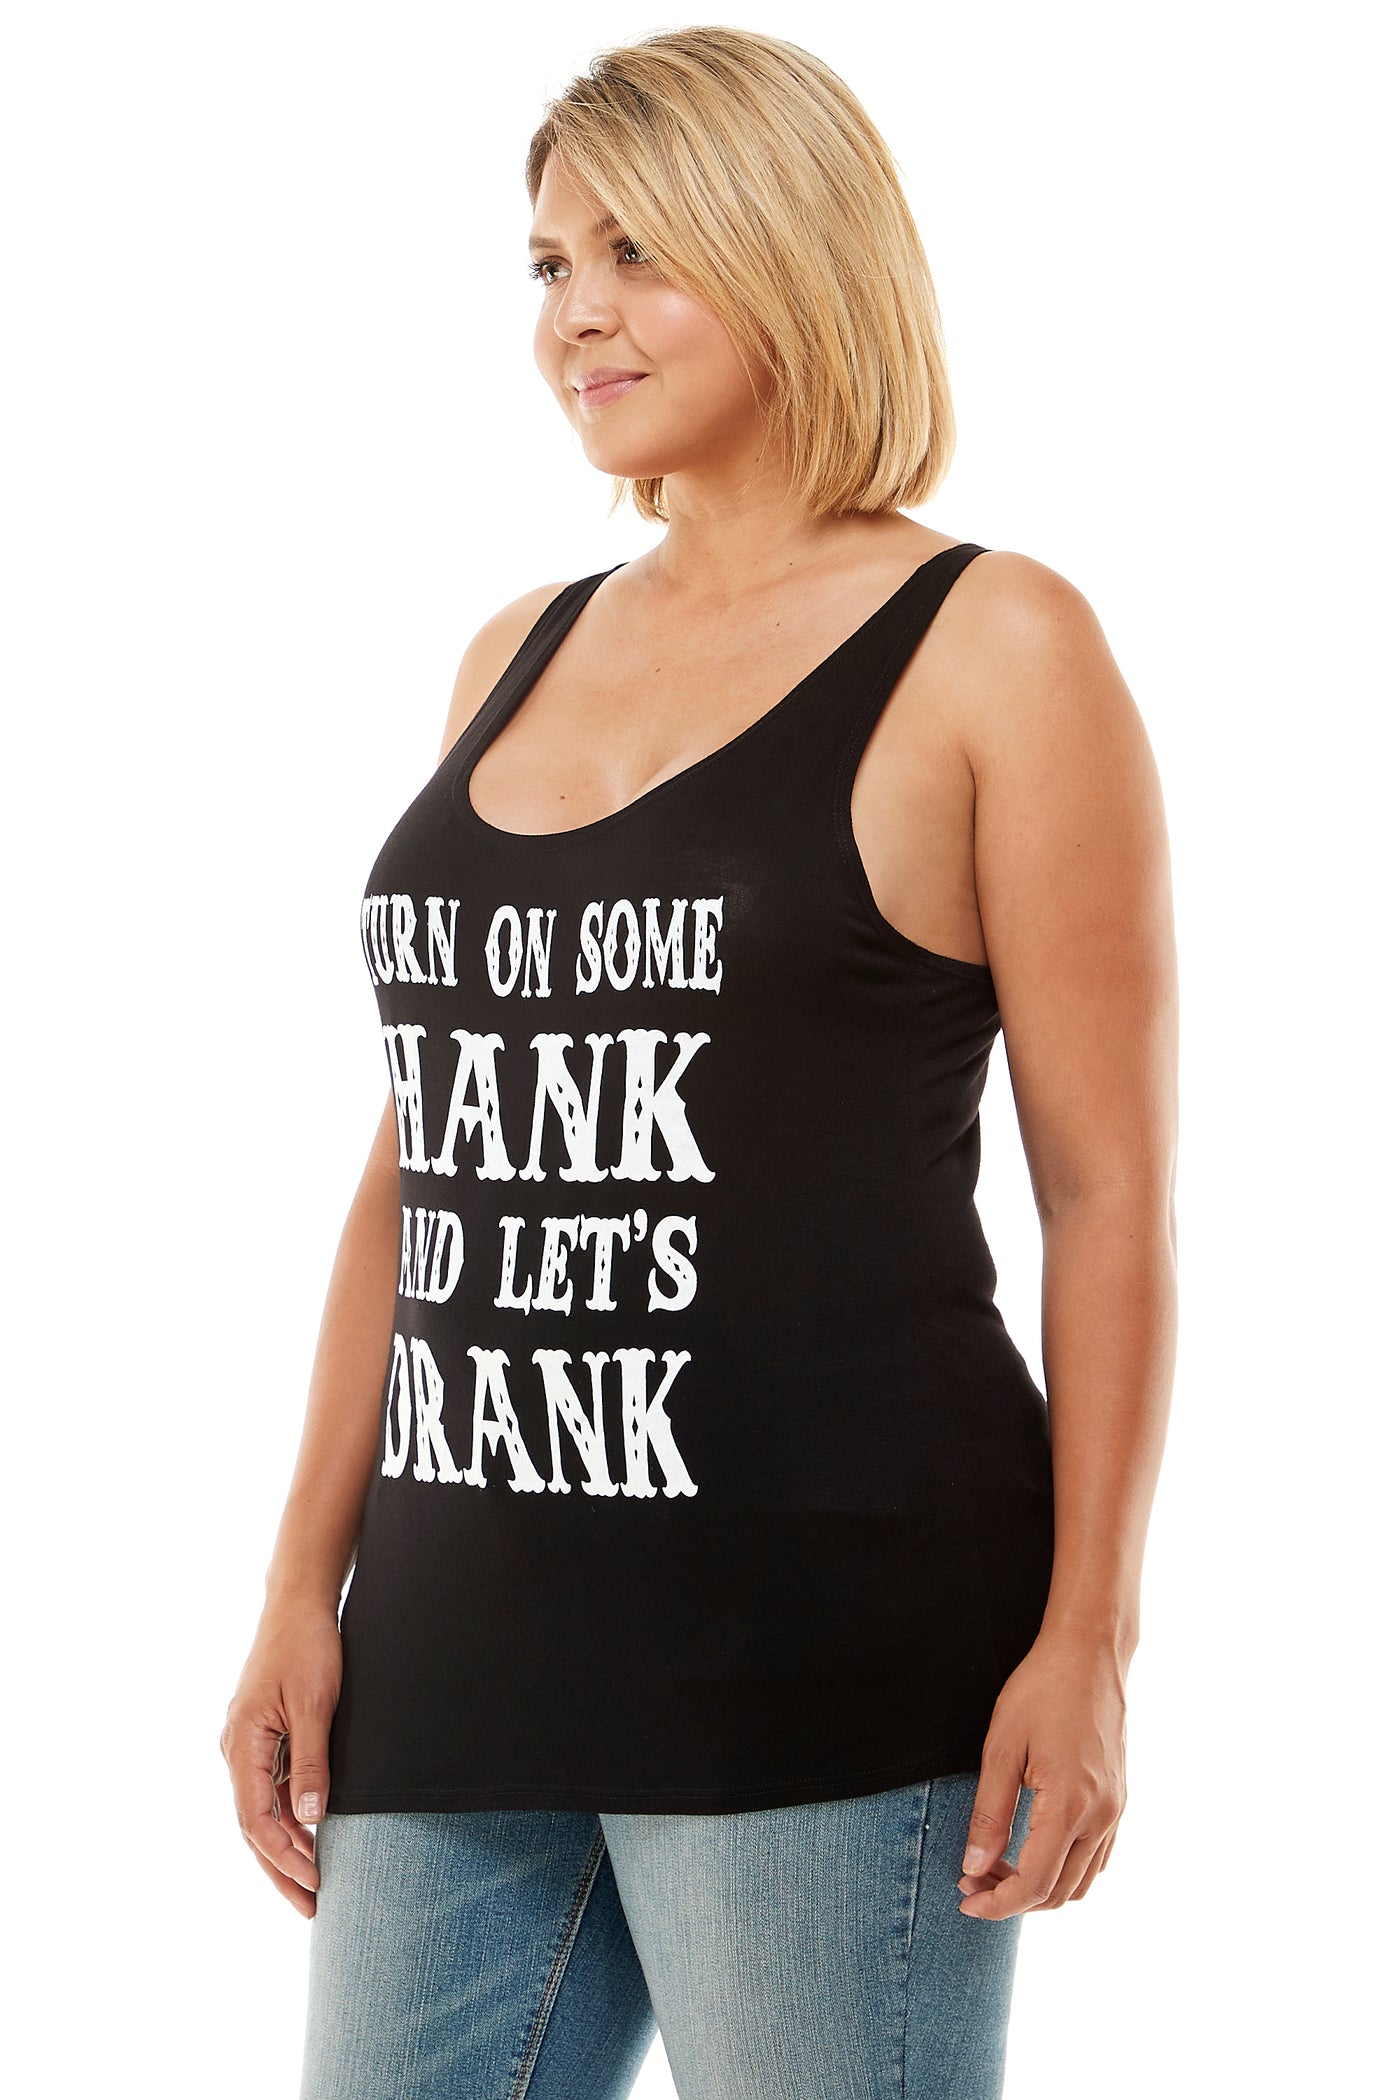 TURN ON SOME HANK AND LET'S DRANK TANK TOP – Trailsclothing.com